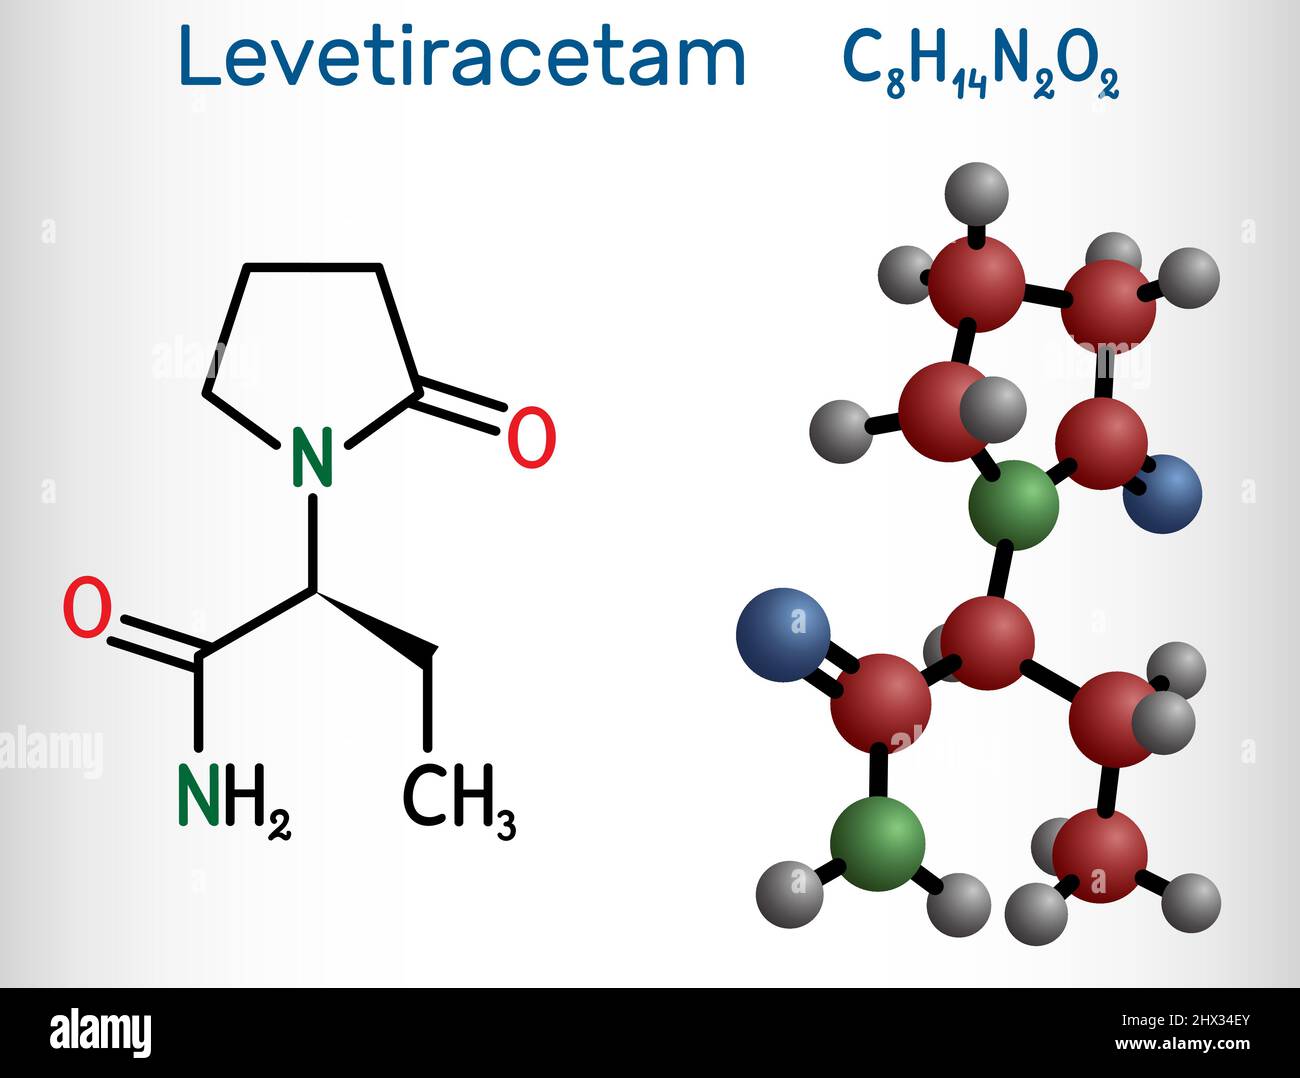 Levetiracetam molecule. It is pyrrolidine, anticonvulsant medication used to treat epilepsy. Structural chemical formula and molecule model. Vector il Stock Vector